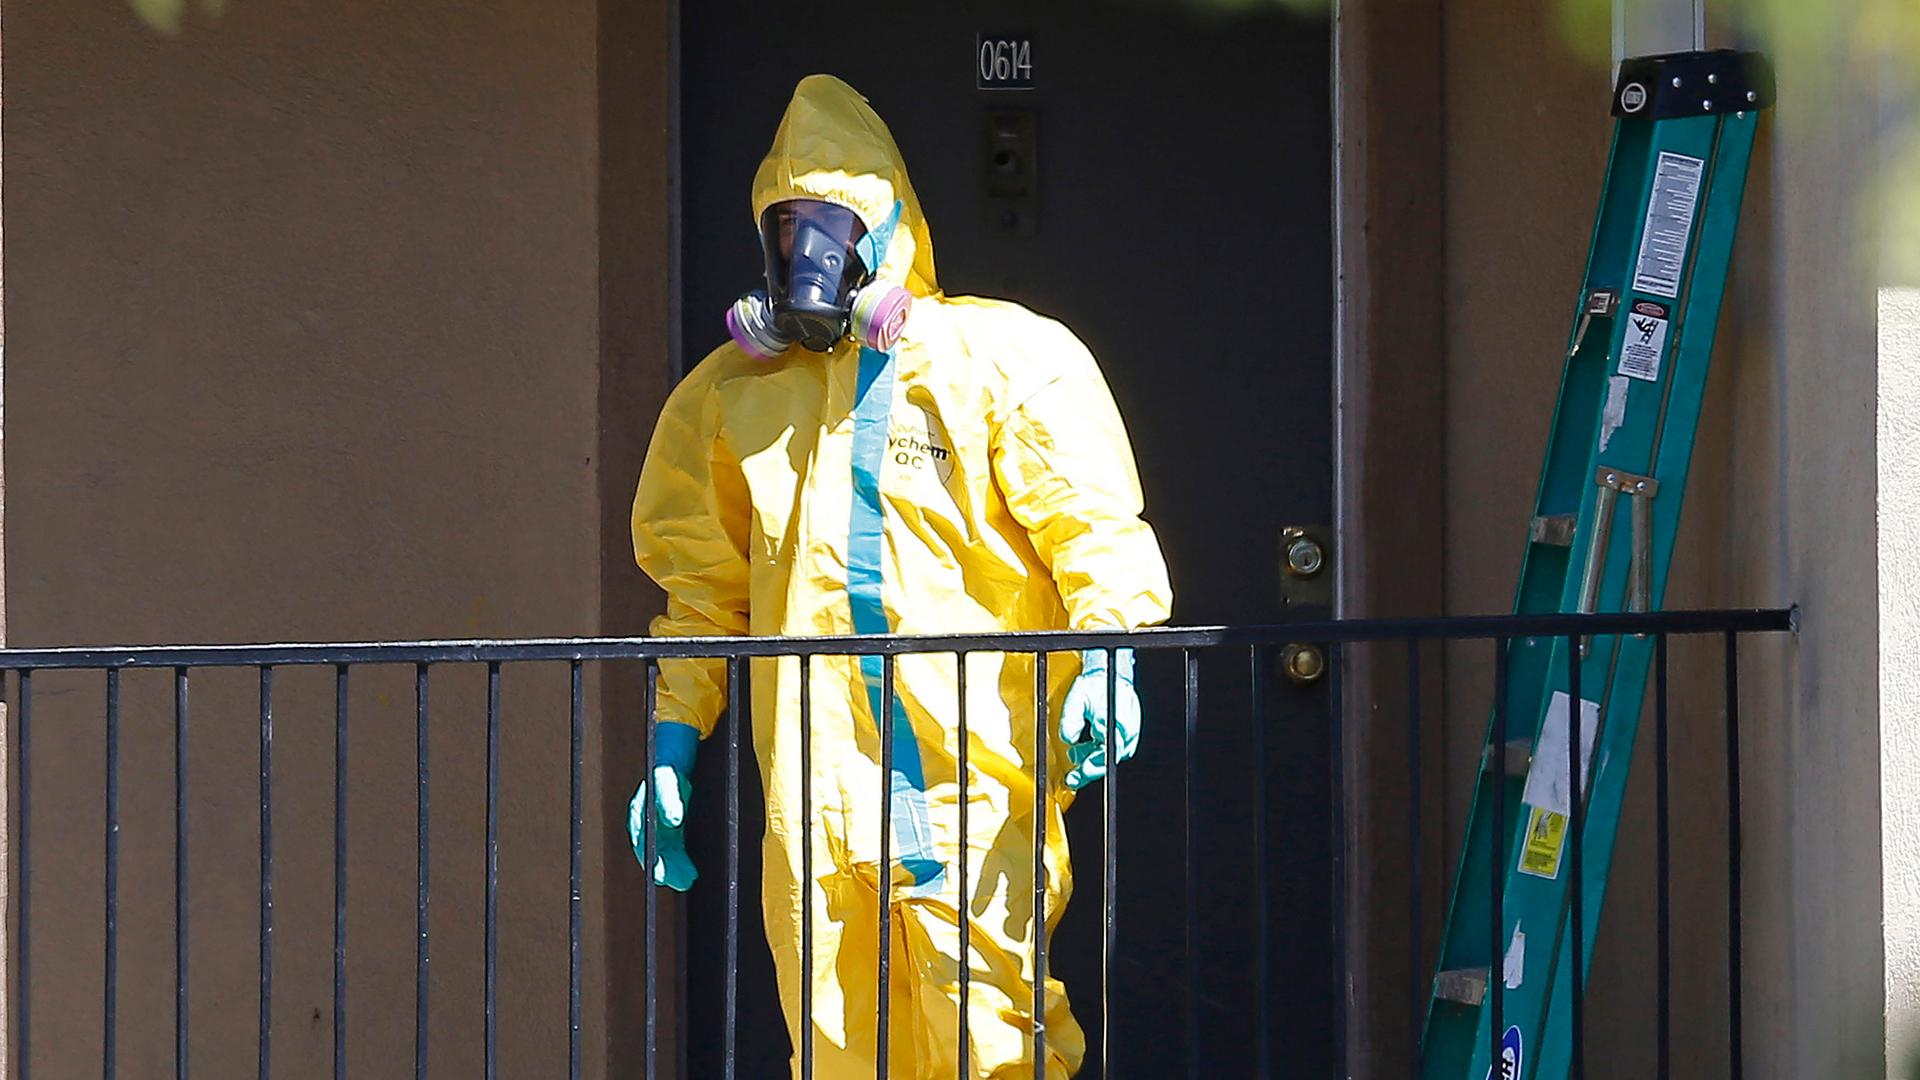 A worker wearing a hazardous material suit arrives at the apartment unit where a man diagnosed with the Ebola virus was staying in Dallas, Texas, on October 3, 2014.